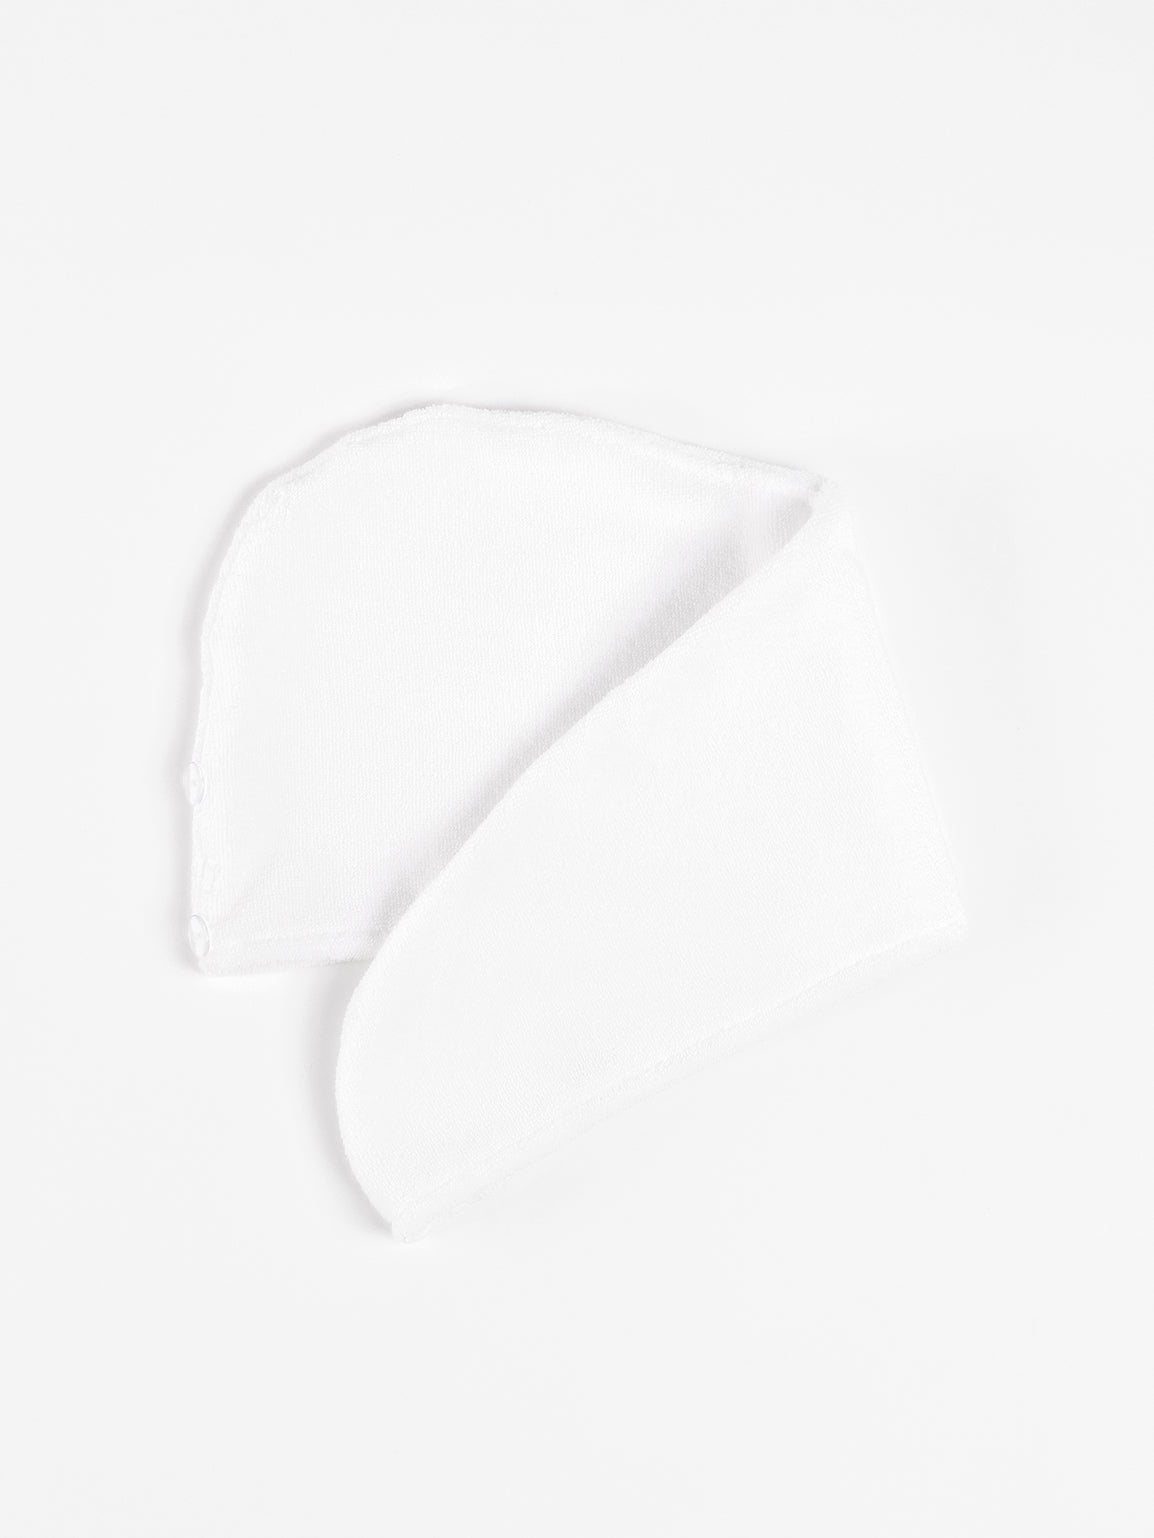 Flat lay of white hair towel with white background 